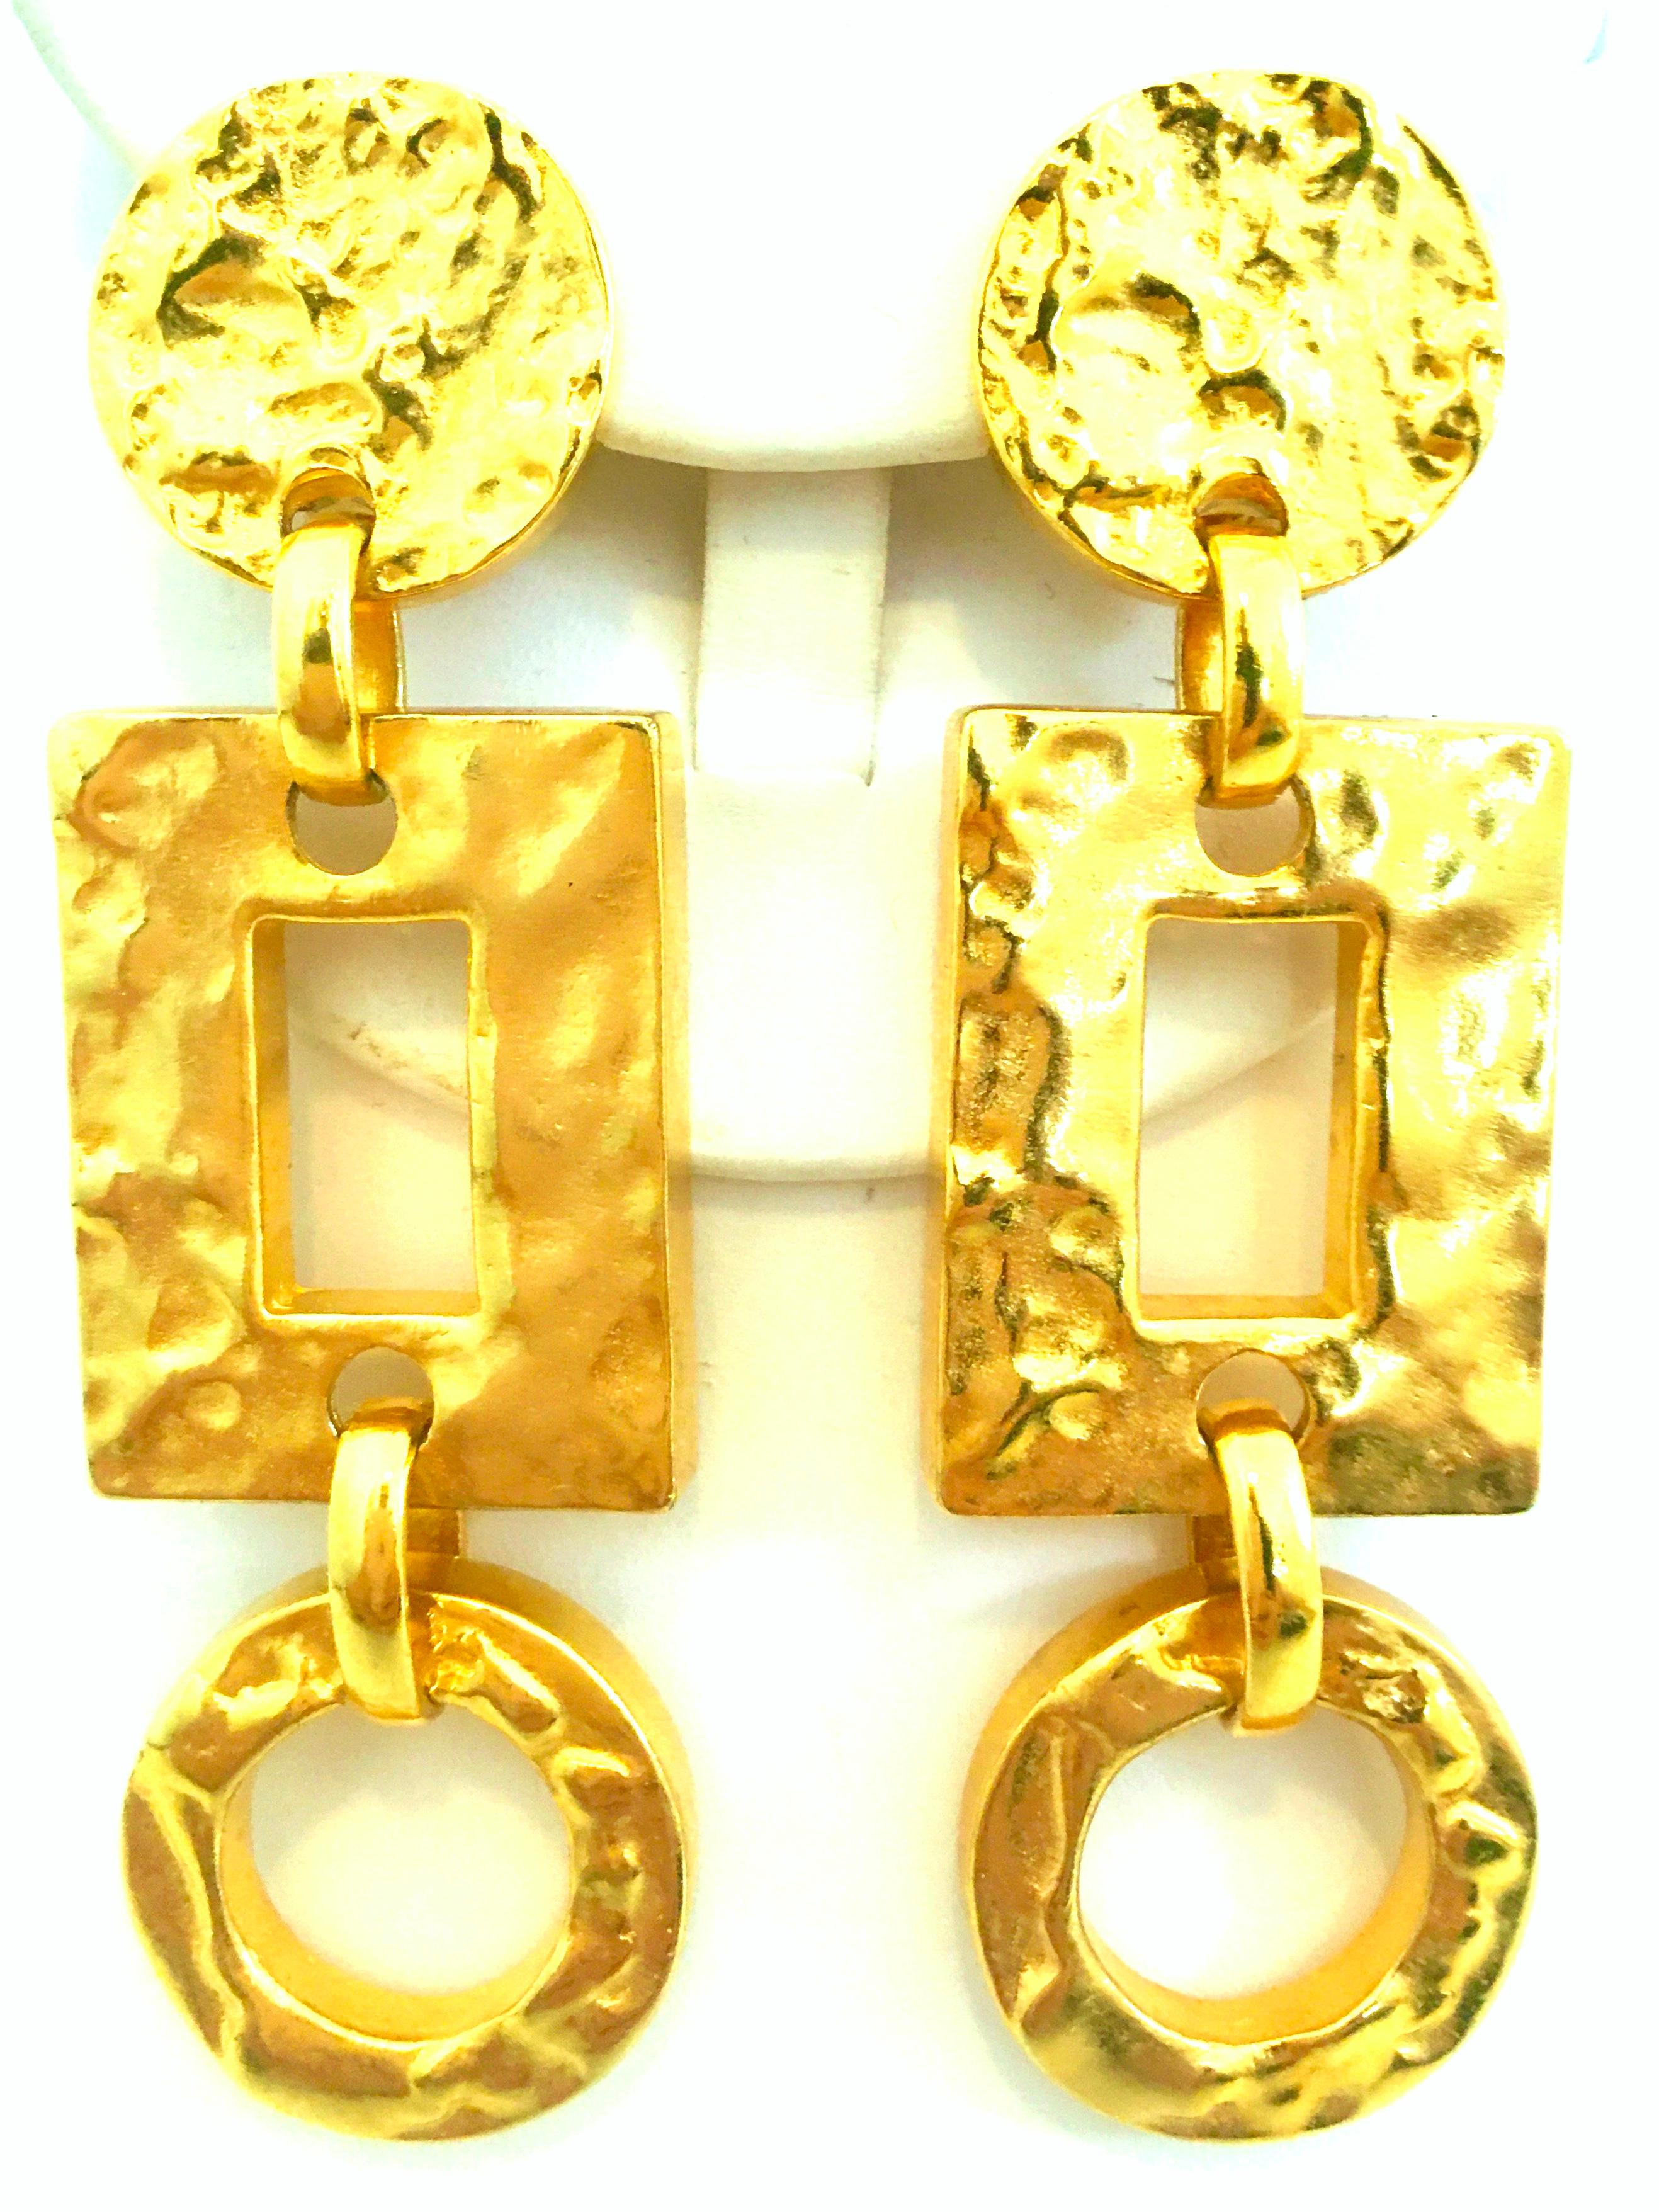 21st Century Michael Kors gold plated monumental pair of Modernist dangle earrings. Features a hammered finish with geometric shapes. Procured from the Michael Kors Boutique-Worth Av. Palm Beach island, these substantial clip style earrings are like